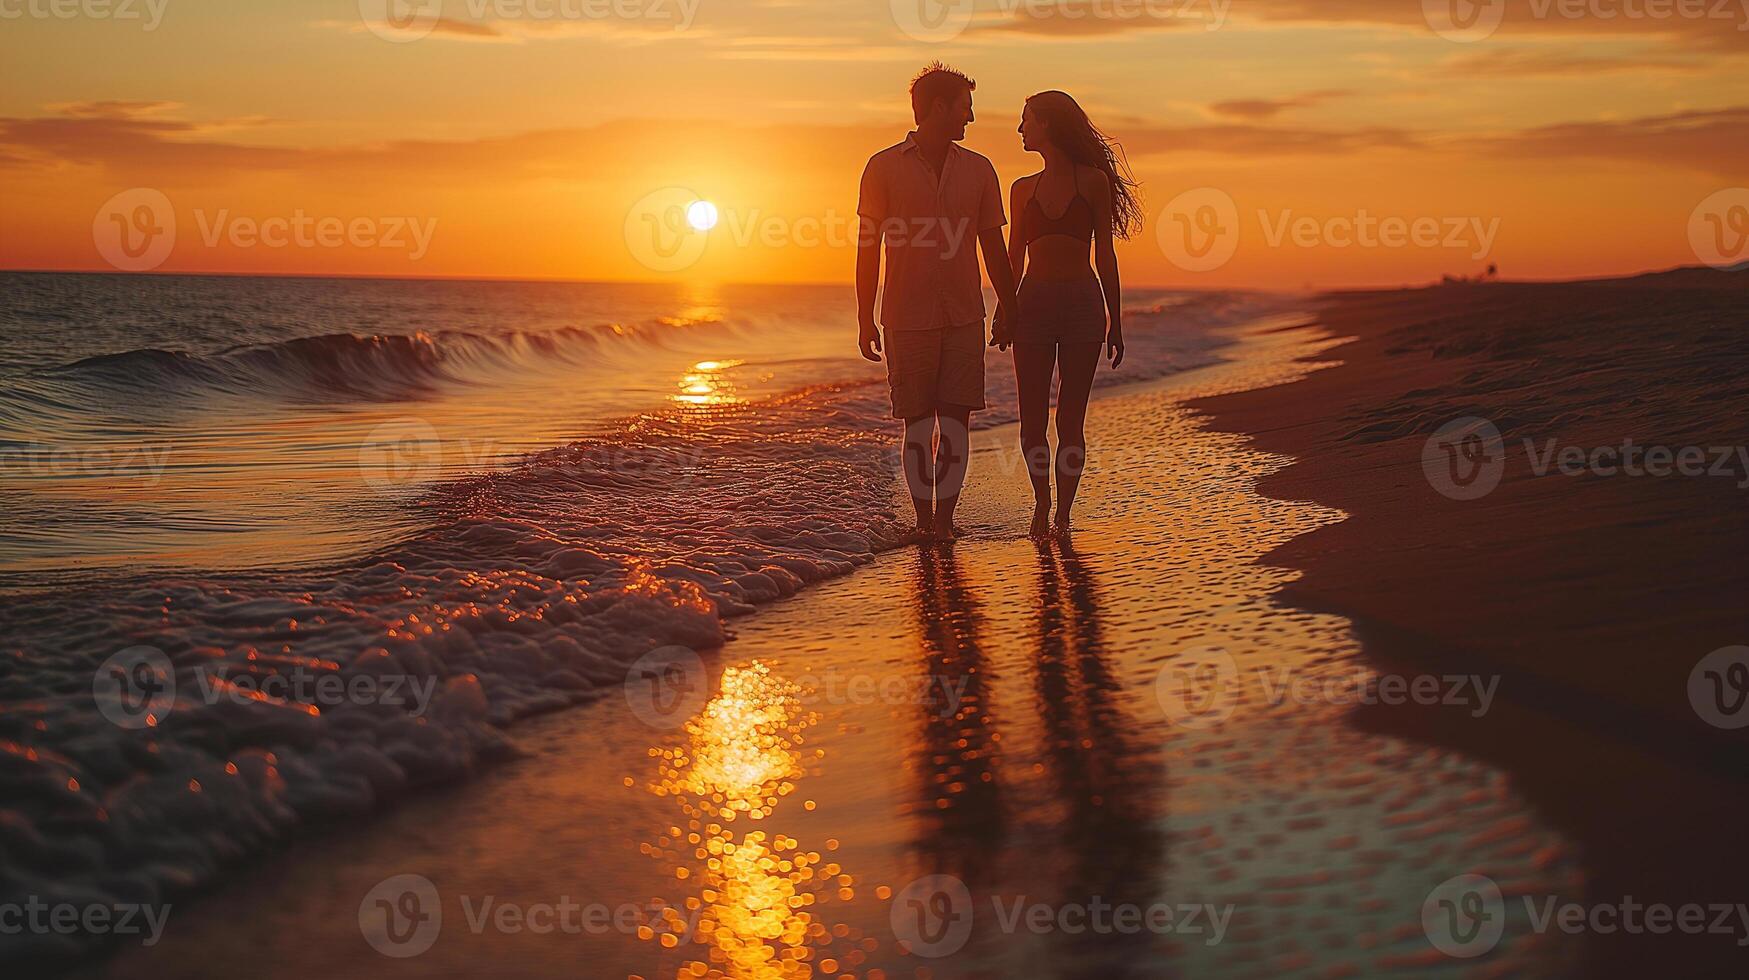 AI generated Joyful moments of love and laughter captured in golden sunset light photo